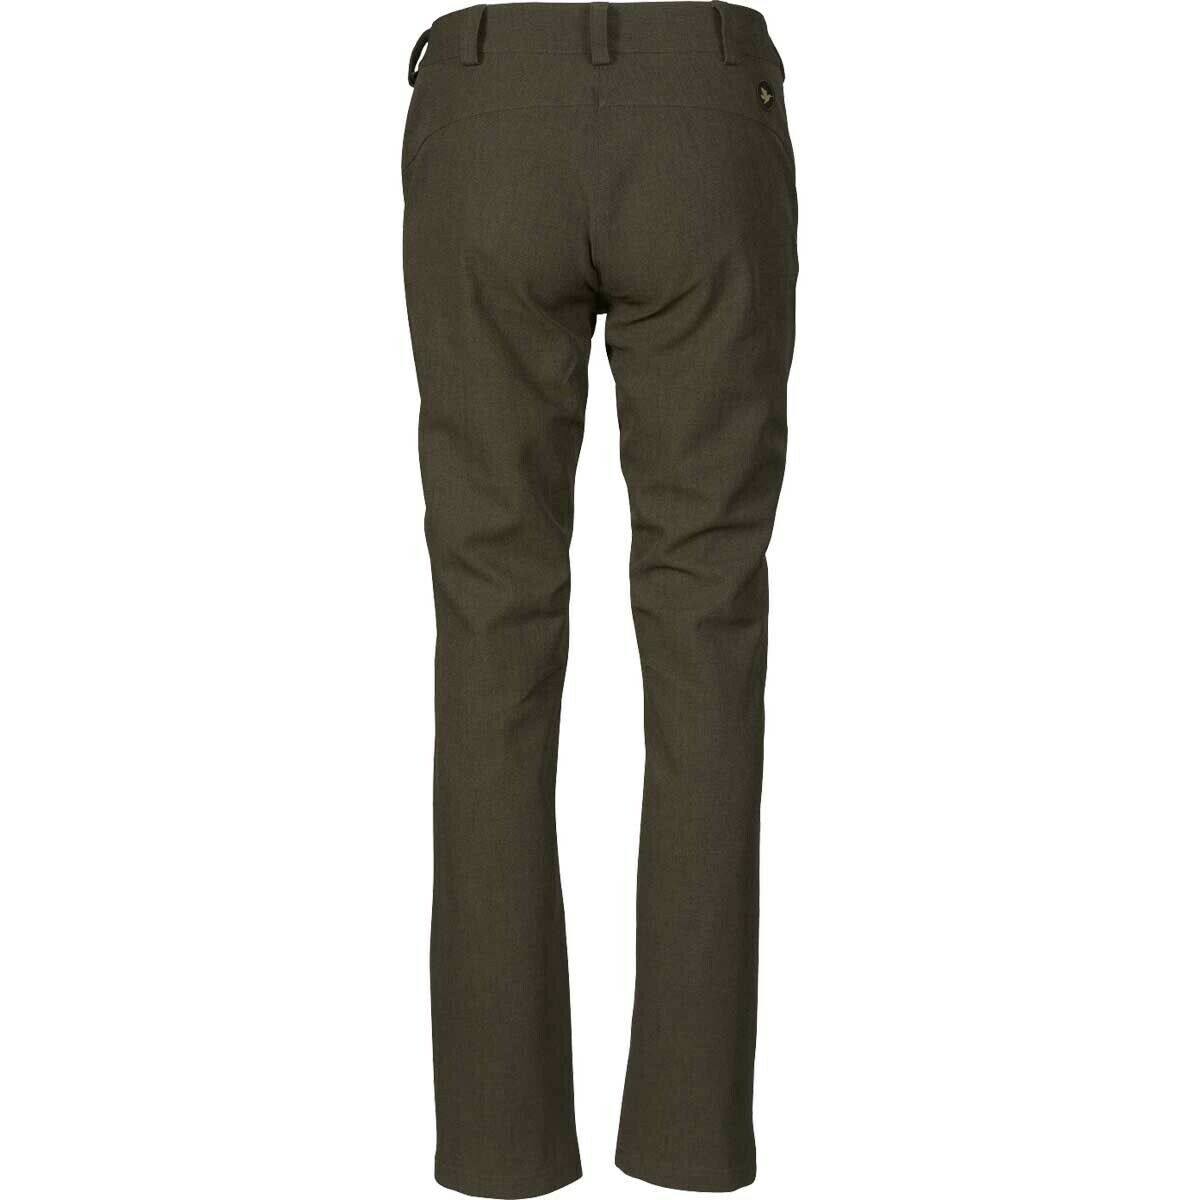 Seeland Women's Woodcock Advanced Trousers - Willow Green